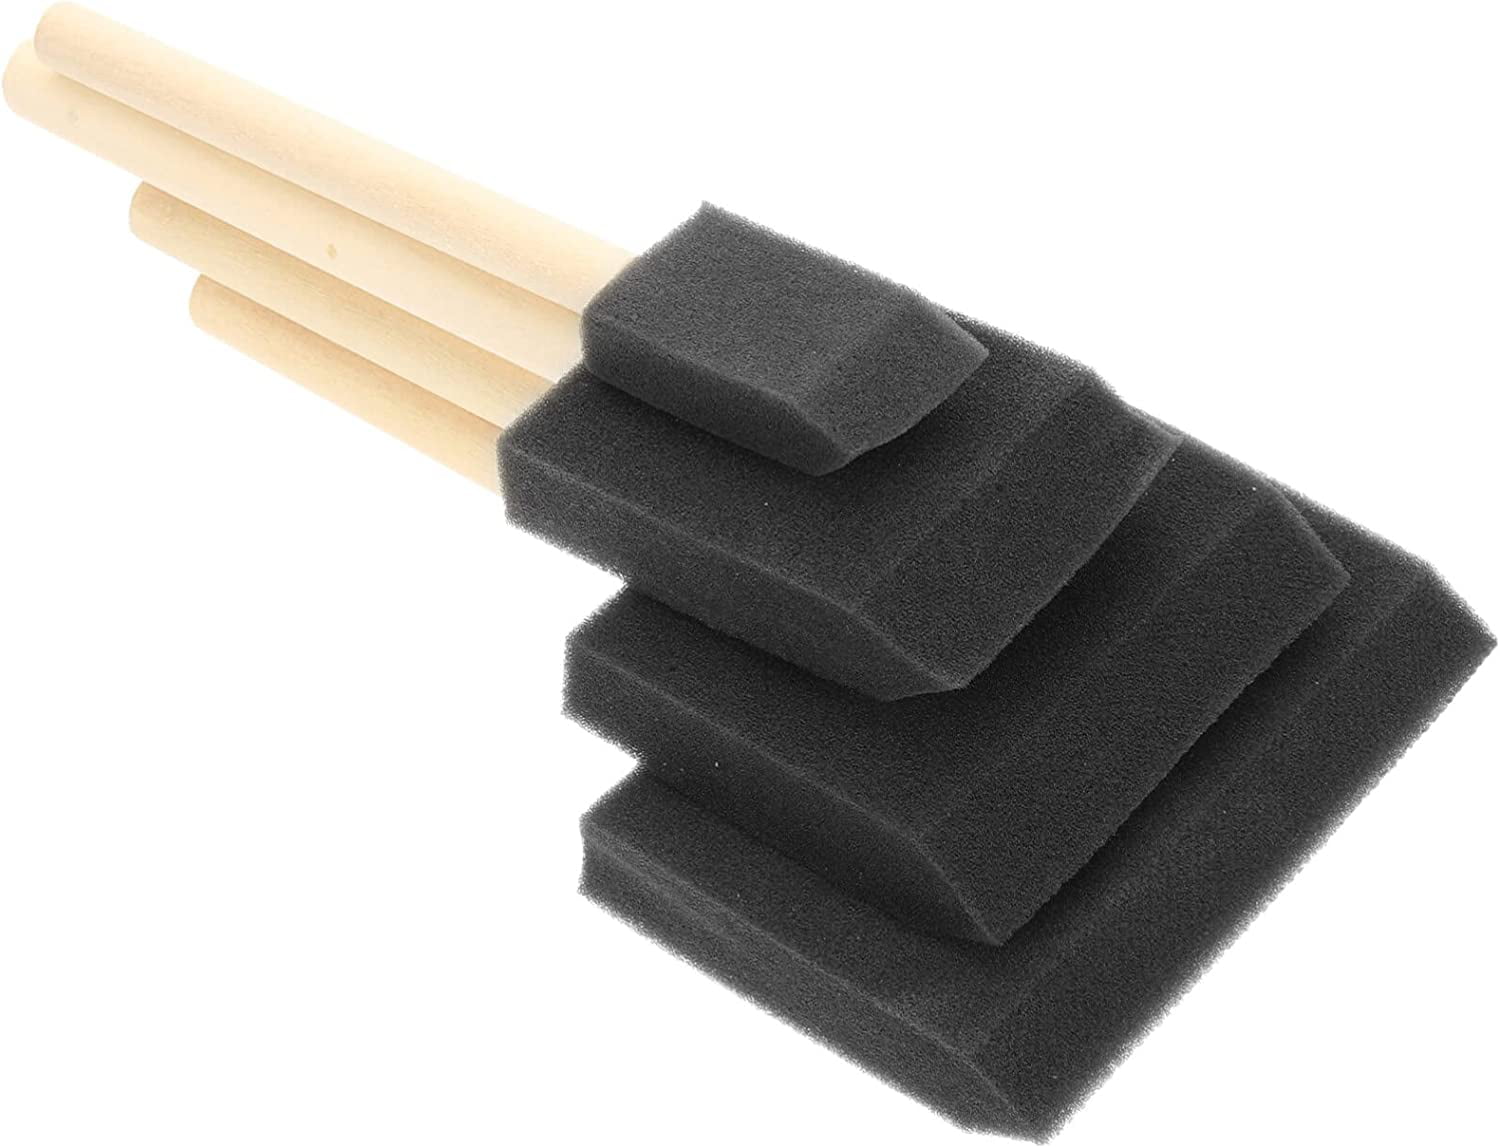 12 Pcs Foam Brushes Black Sponge Paint Brushes Wooden Handle Sponge Brushes  for Painting, Staining, Drawing, Varnishes, DIY Craft Projects, 4 Assorted